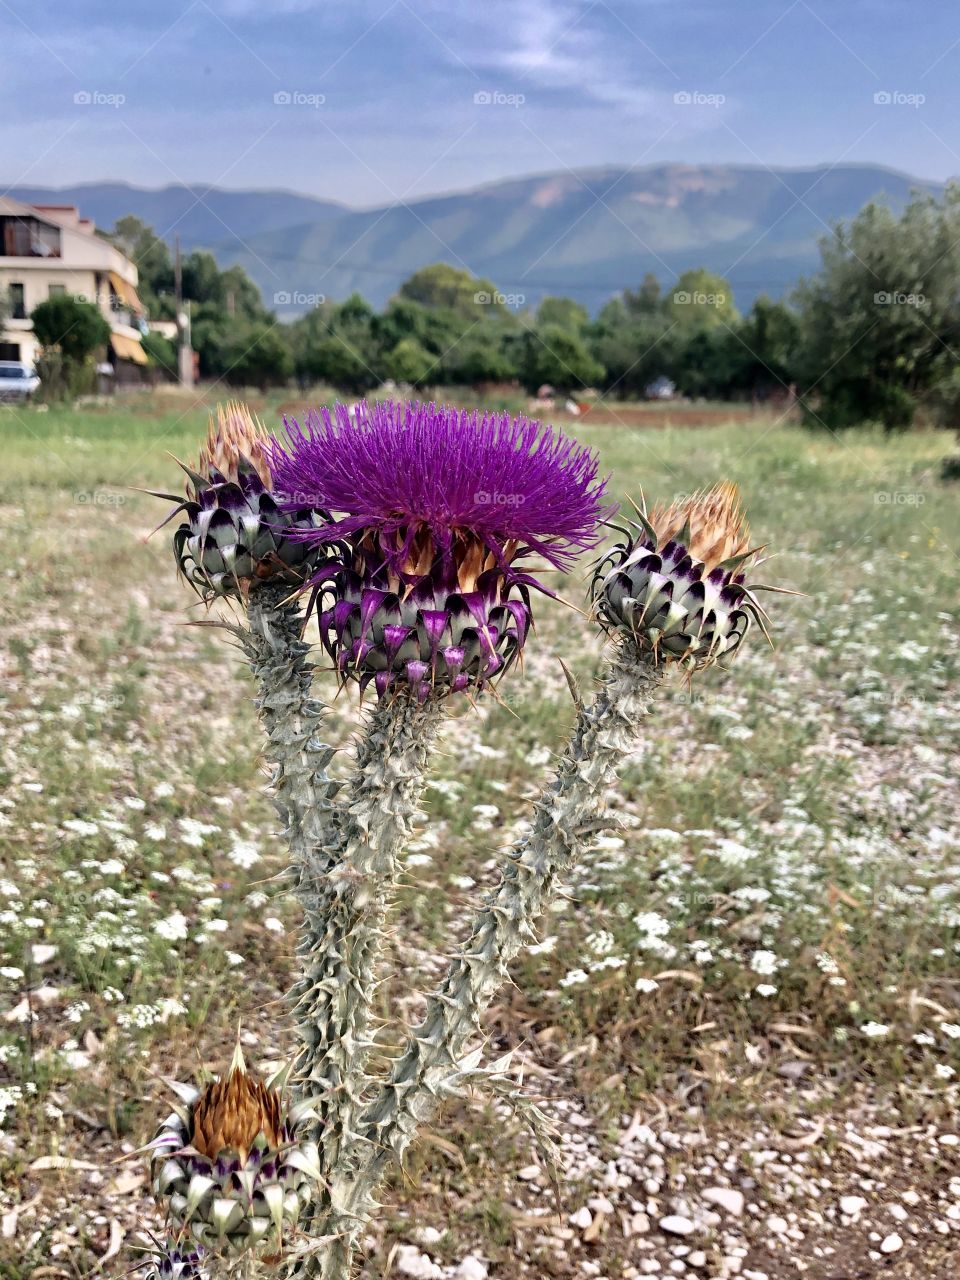 The beautiful flowers of kefalonia. Colorful, mysterious, and beautiful. 